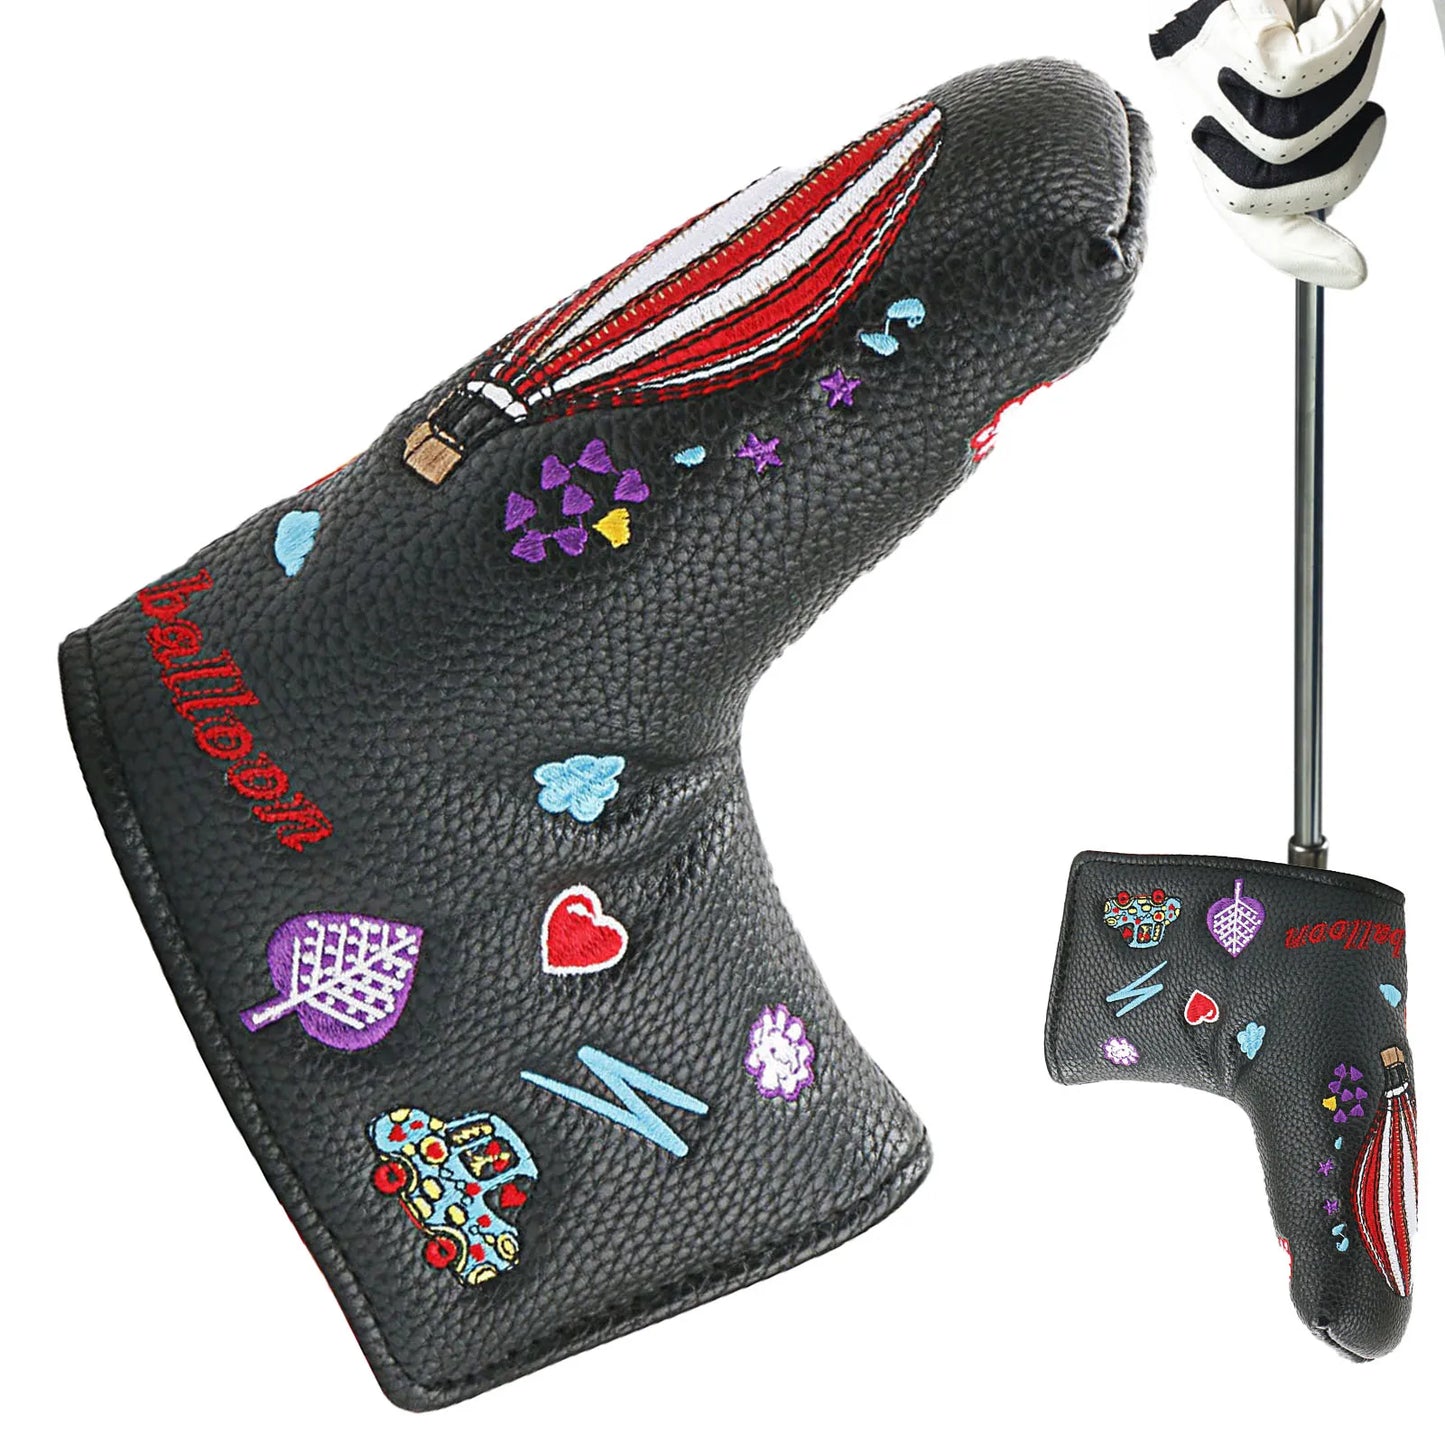 Golf  Putter Headcover Magnetic Cover PU Leather Golf Club Head Covers Golf Iron Protector  Reusable Golf Accessories Headcovers